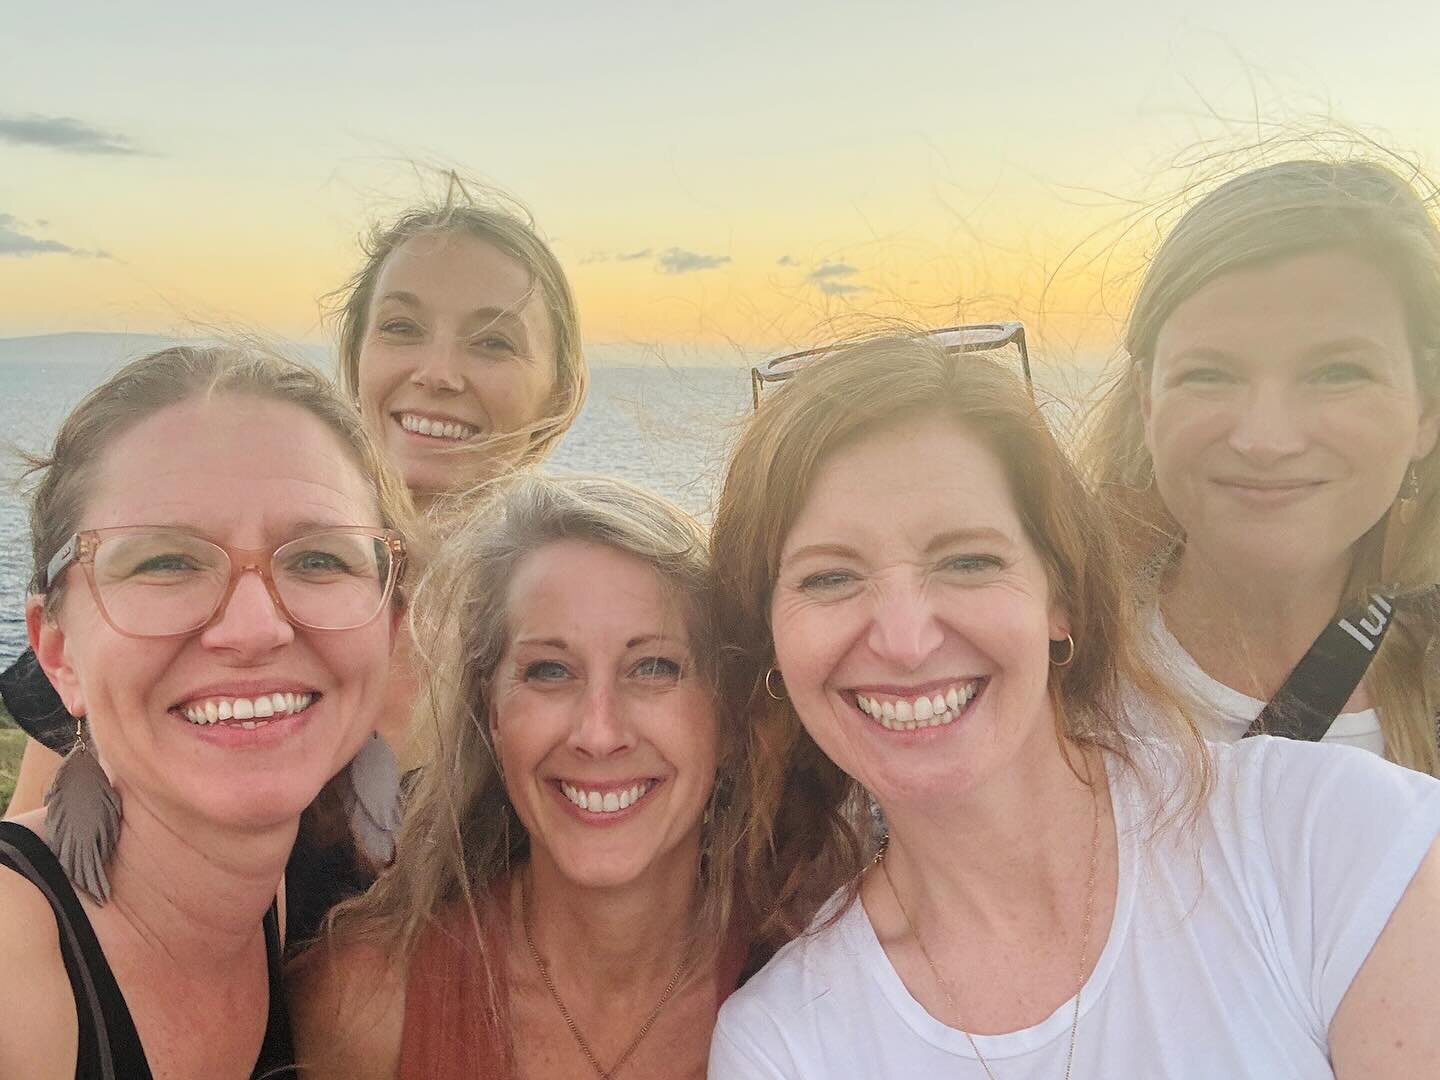 As a retreat designer, I wondered what it would be like if I got to host a retreat for myself with some of my favorite women in ministry in Santa Cruz (my camp ministry home right now). I thought we could get work done on some big speaking projects, 